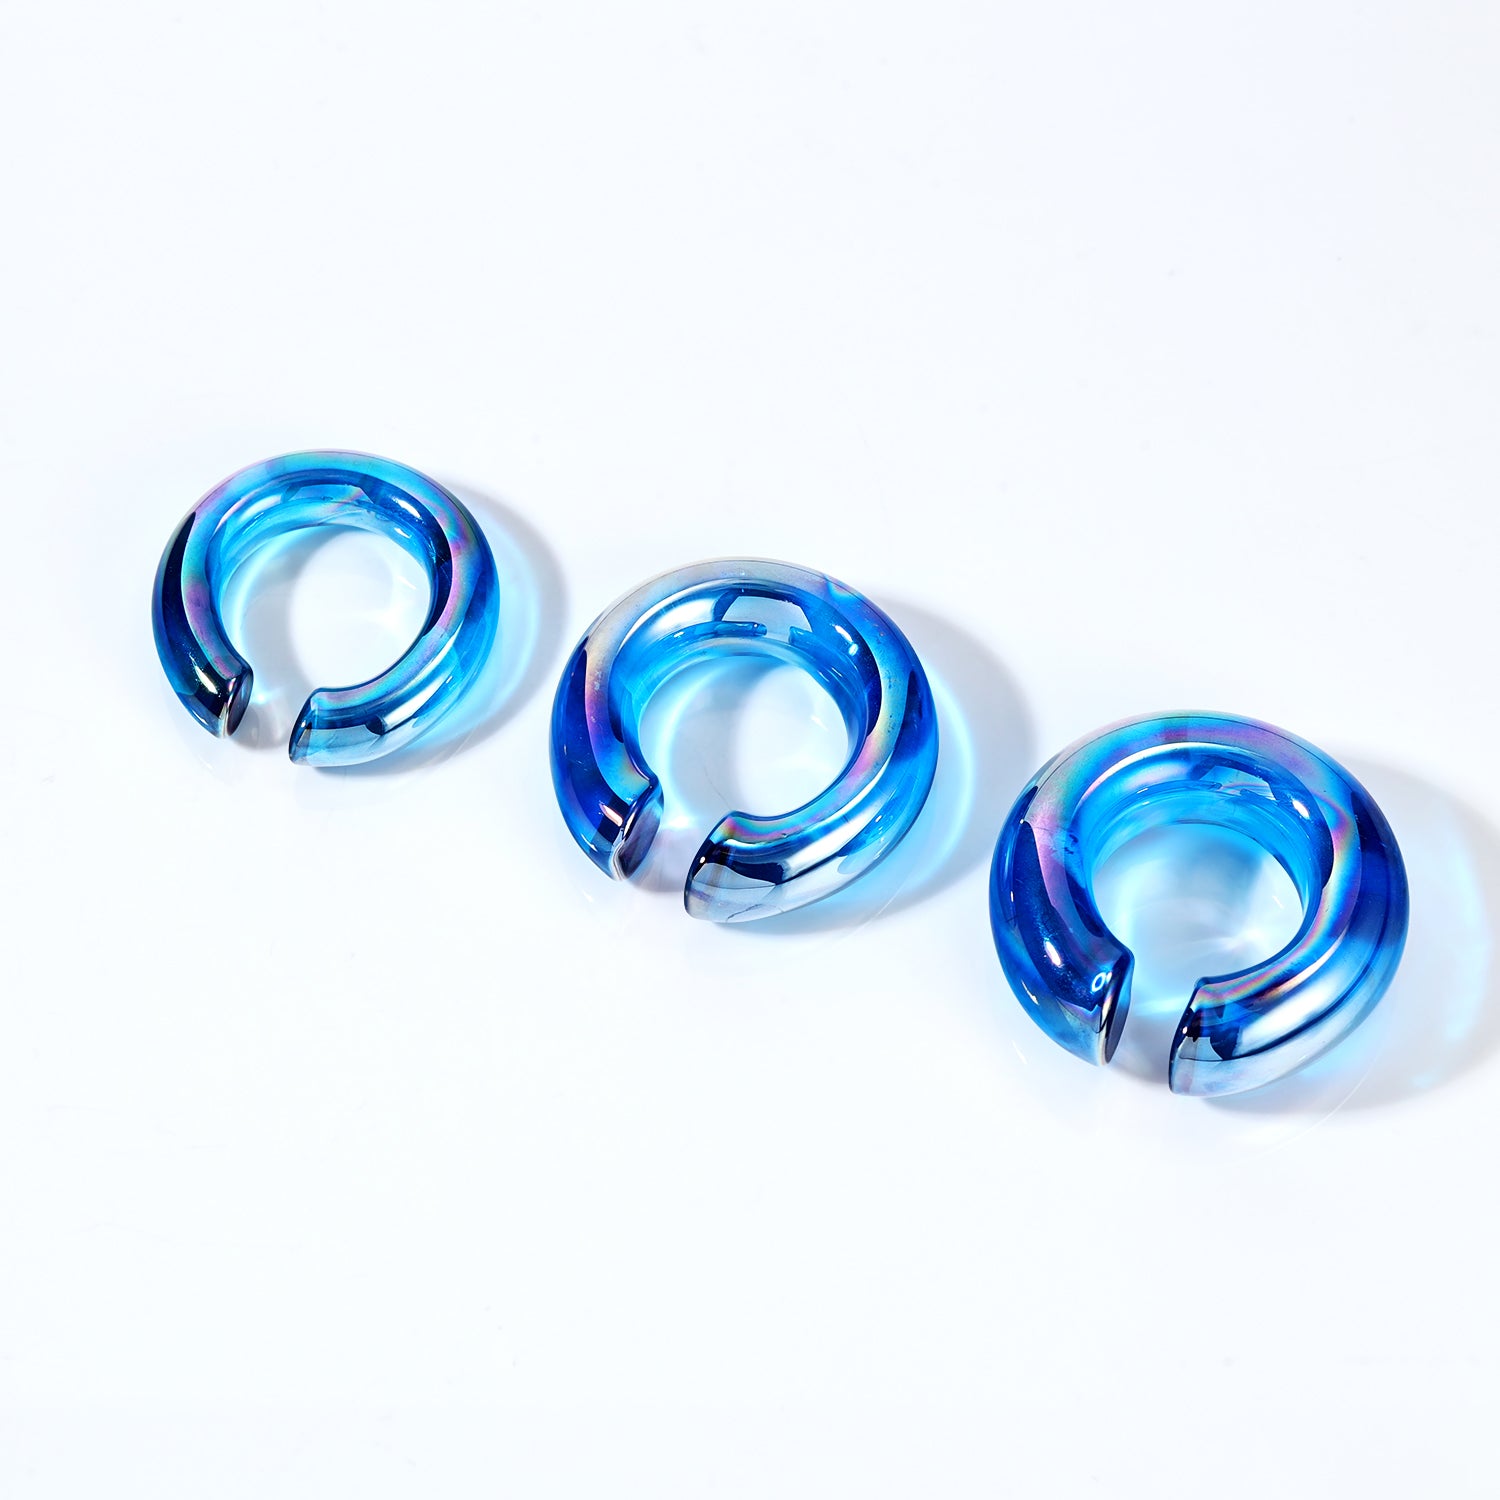 1 Pair C Shaped Ear Plugs Tunnel Blue Glass Stretching Earring Ear Gauge Expanders